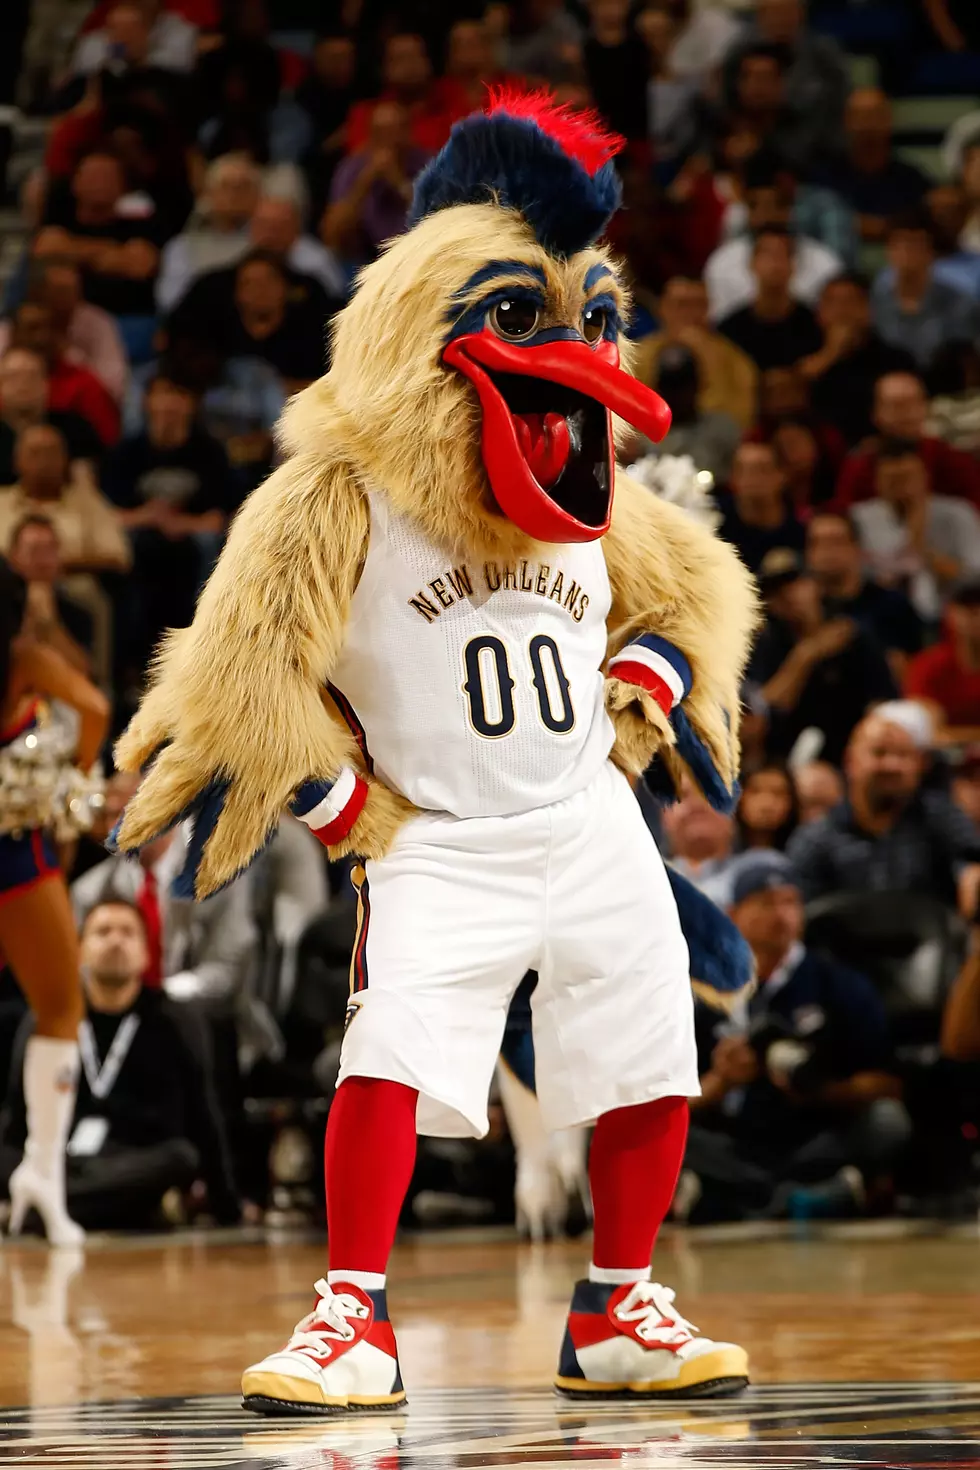 New Orleans Pelicans’ Mascot Reveals New Look After Surgery [PHOTOS]